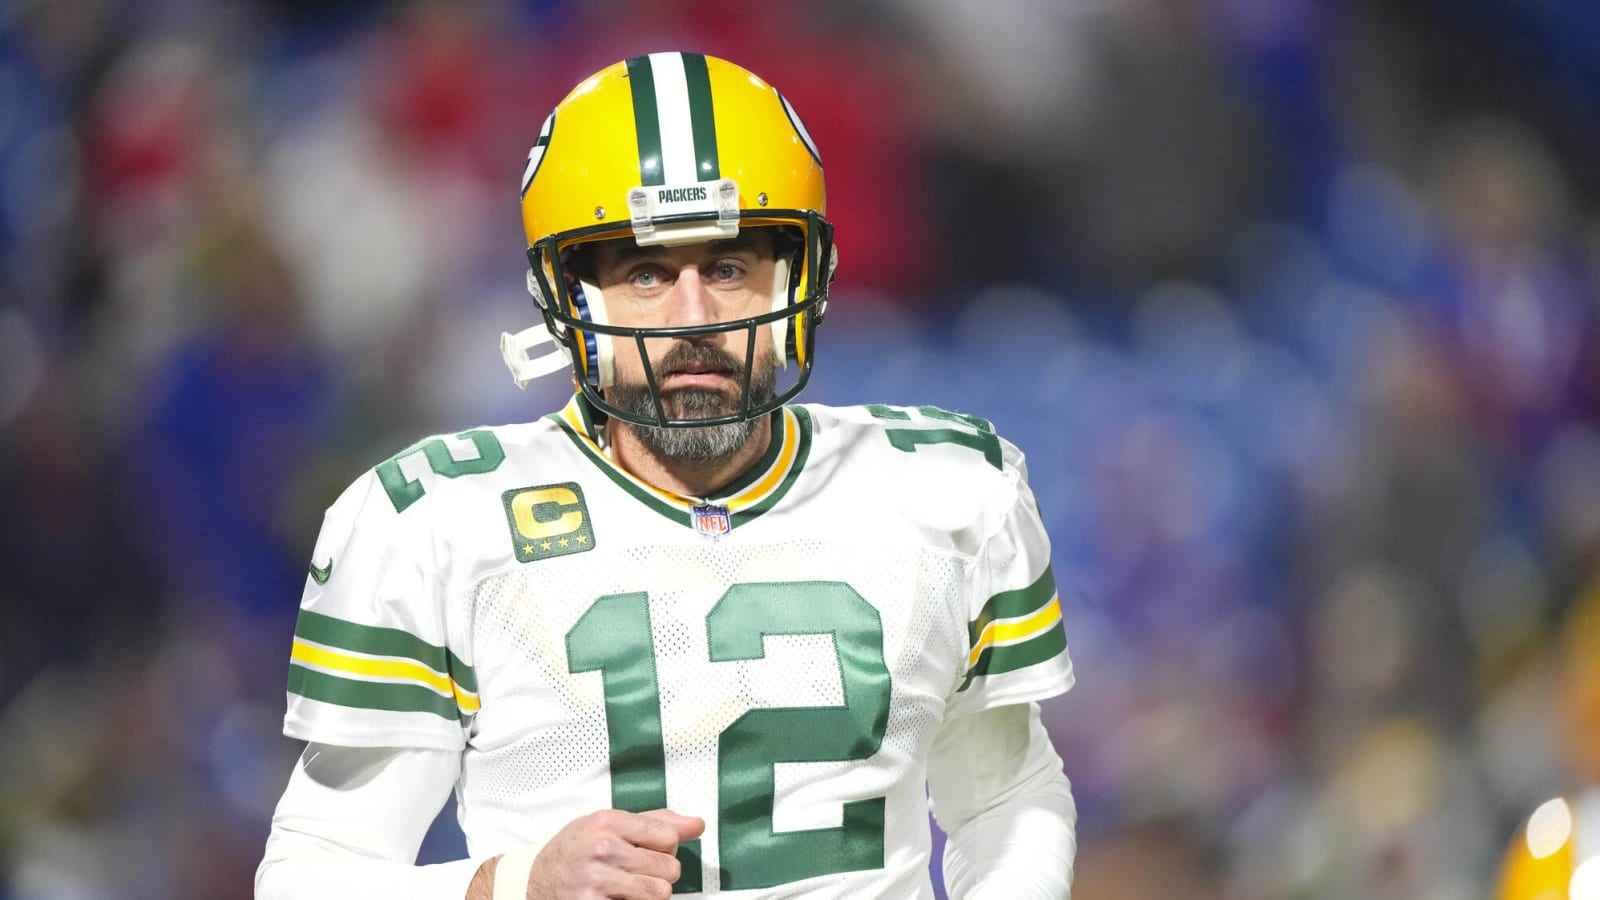 The Green Bay Packers may have just hinted at Aaron Rodgers’ future